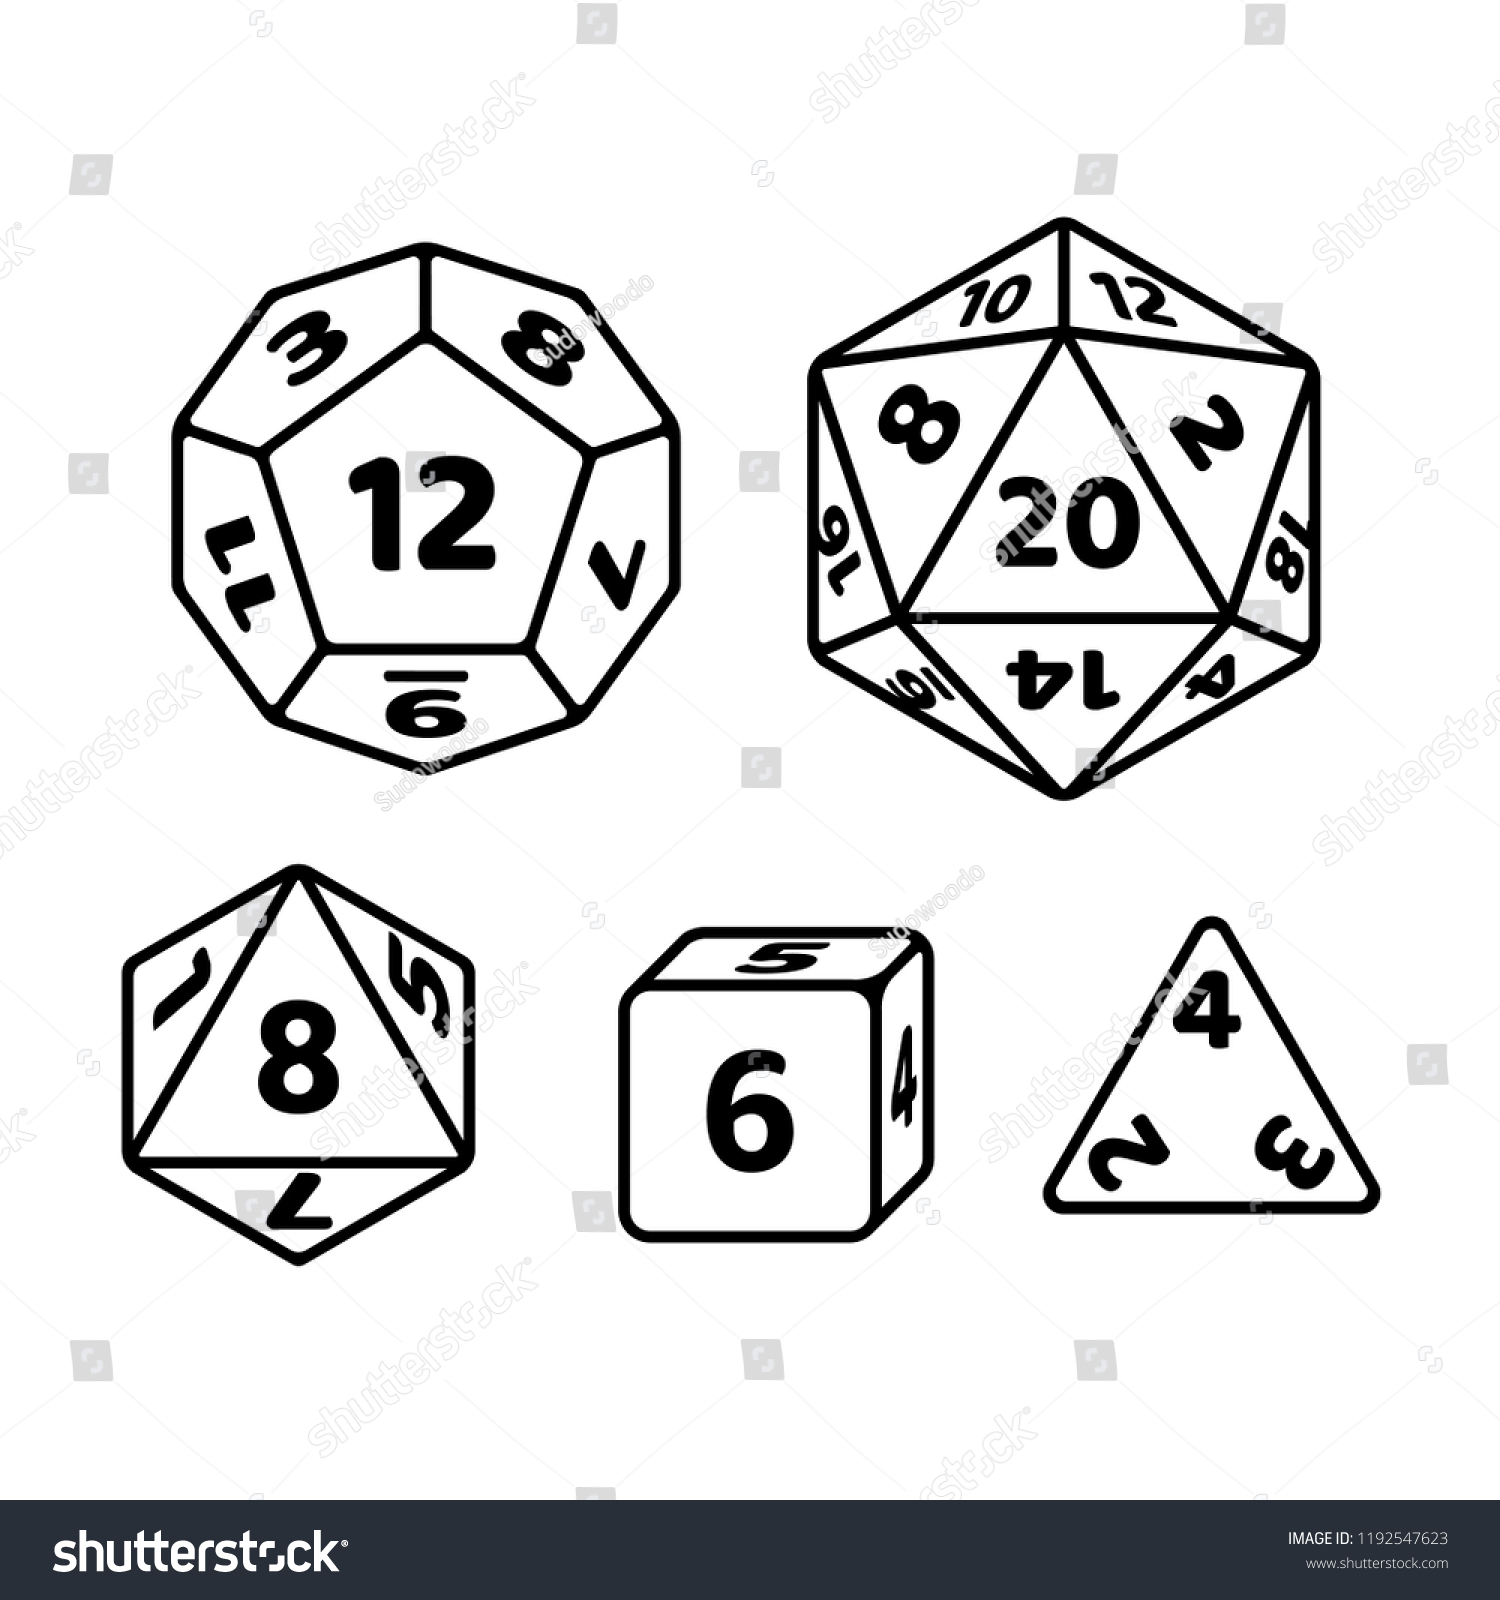 SVG of Set of polyhedron dice for fantasy RPG tabletop games. d20, d12, d8 and cube with numbers on sides. Black and white vector icons. svg